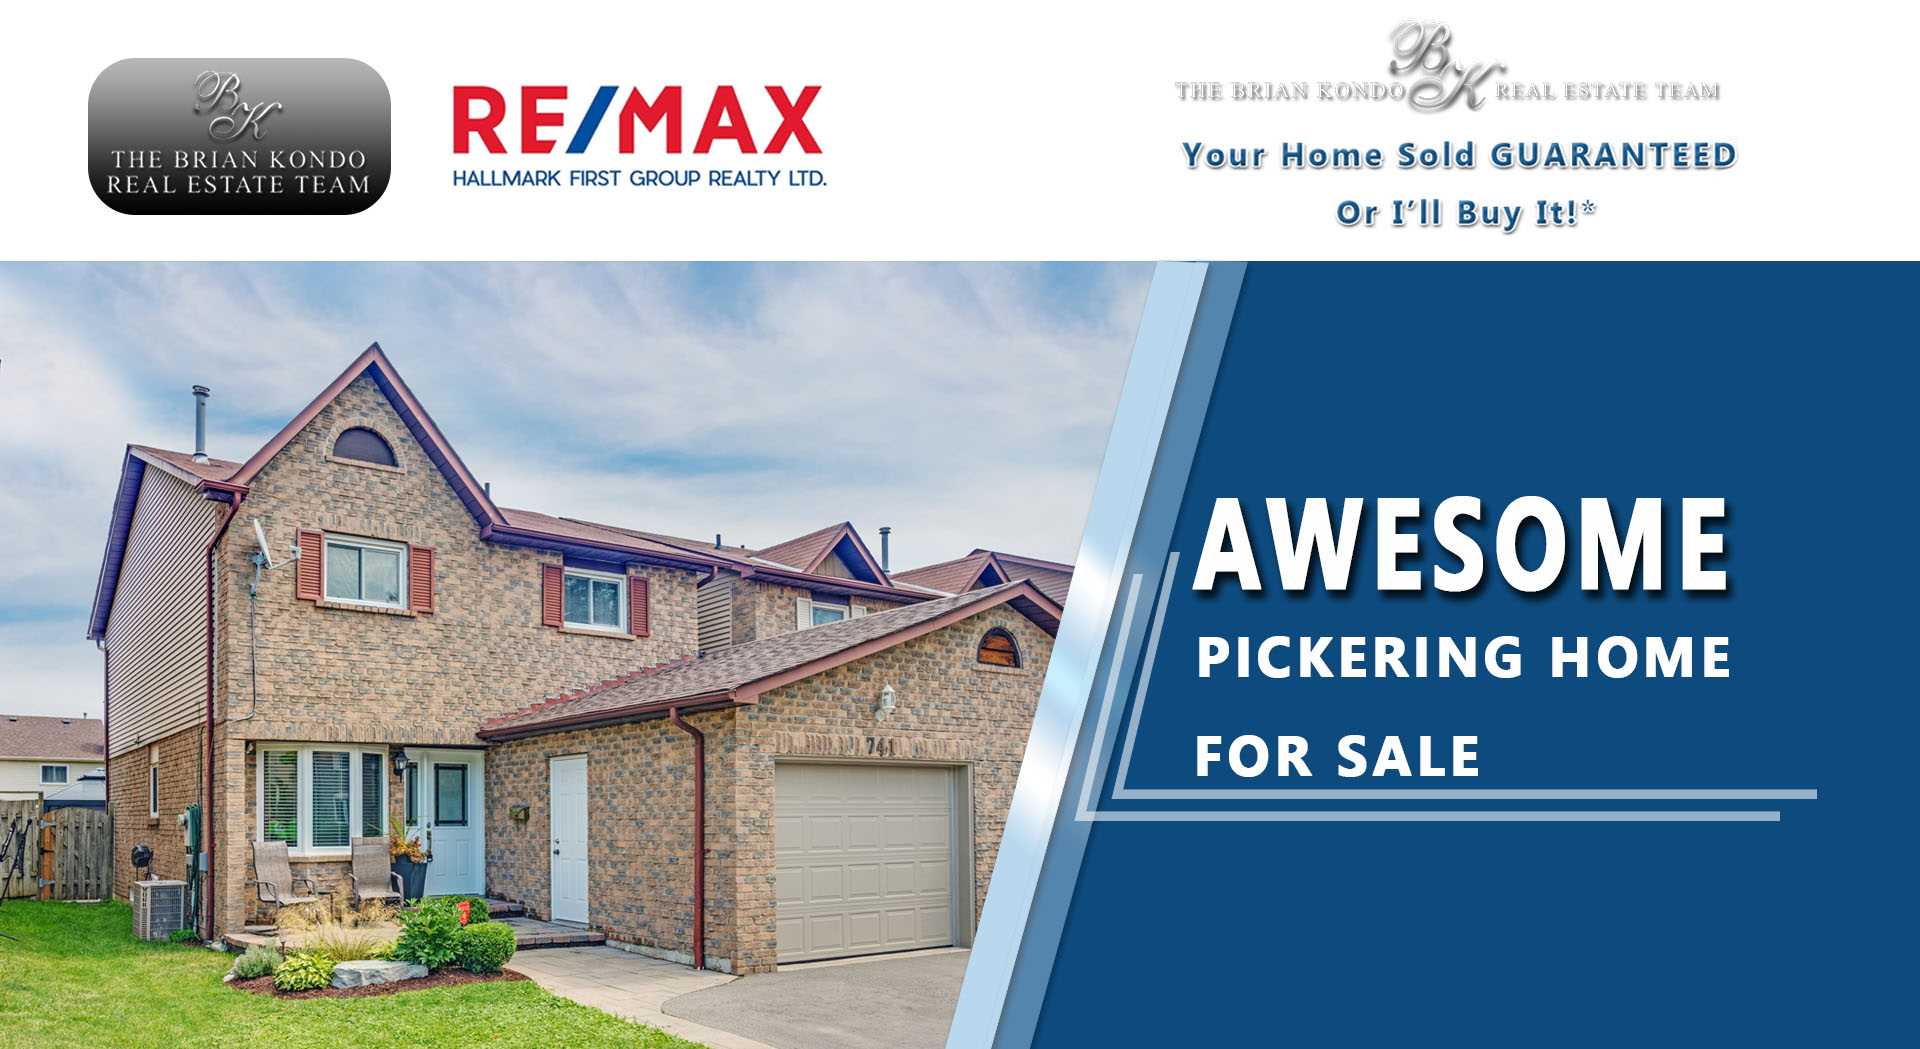 AWESOME PICKERING HOME FOR SALE | The Brian Kondo Real Estate Team